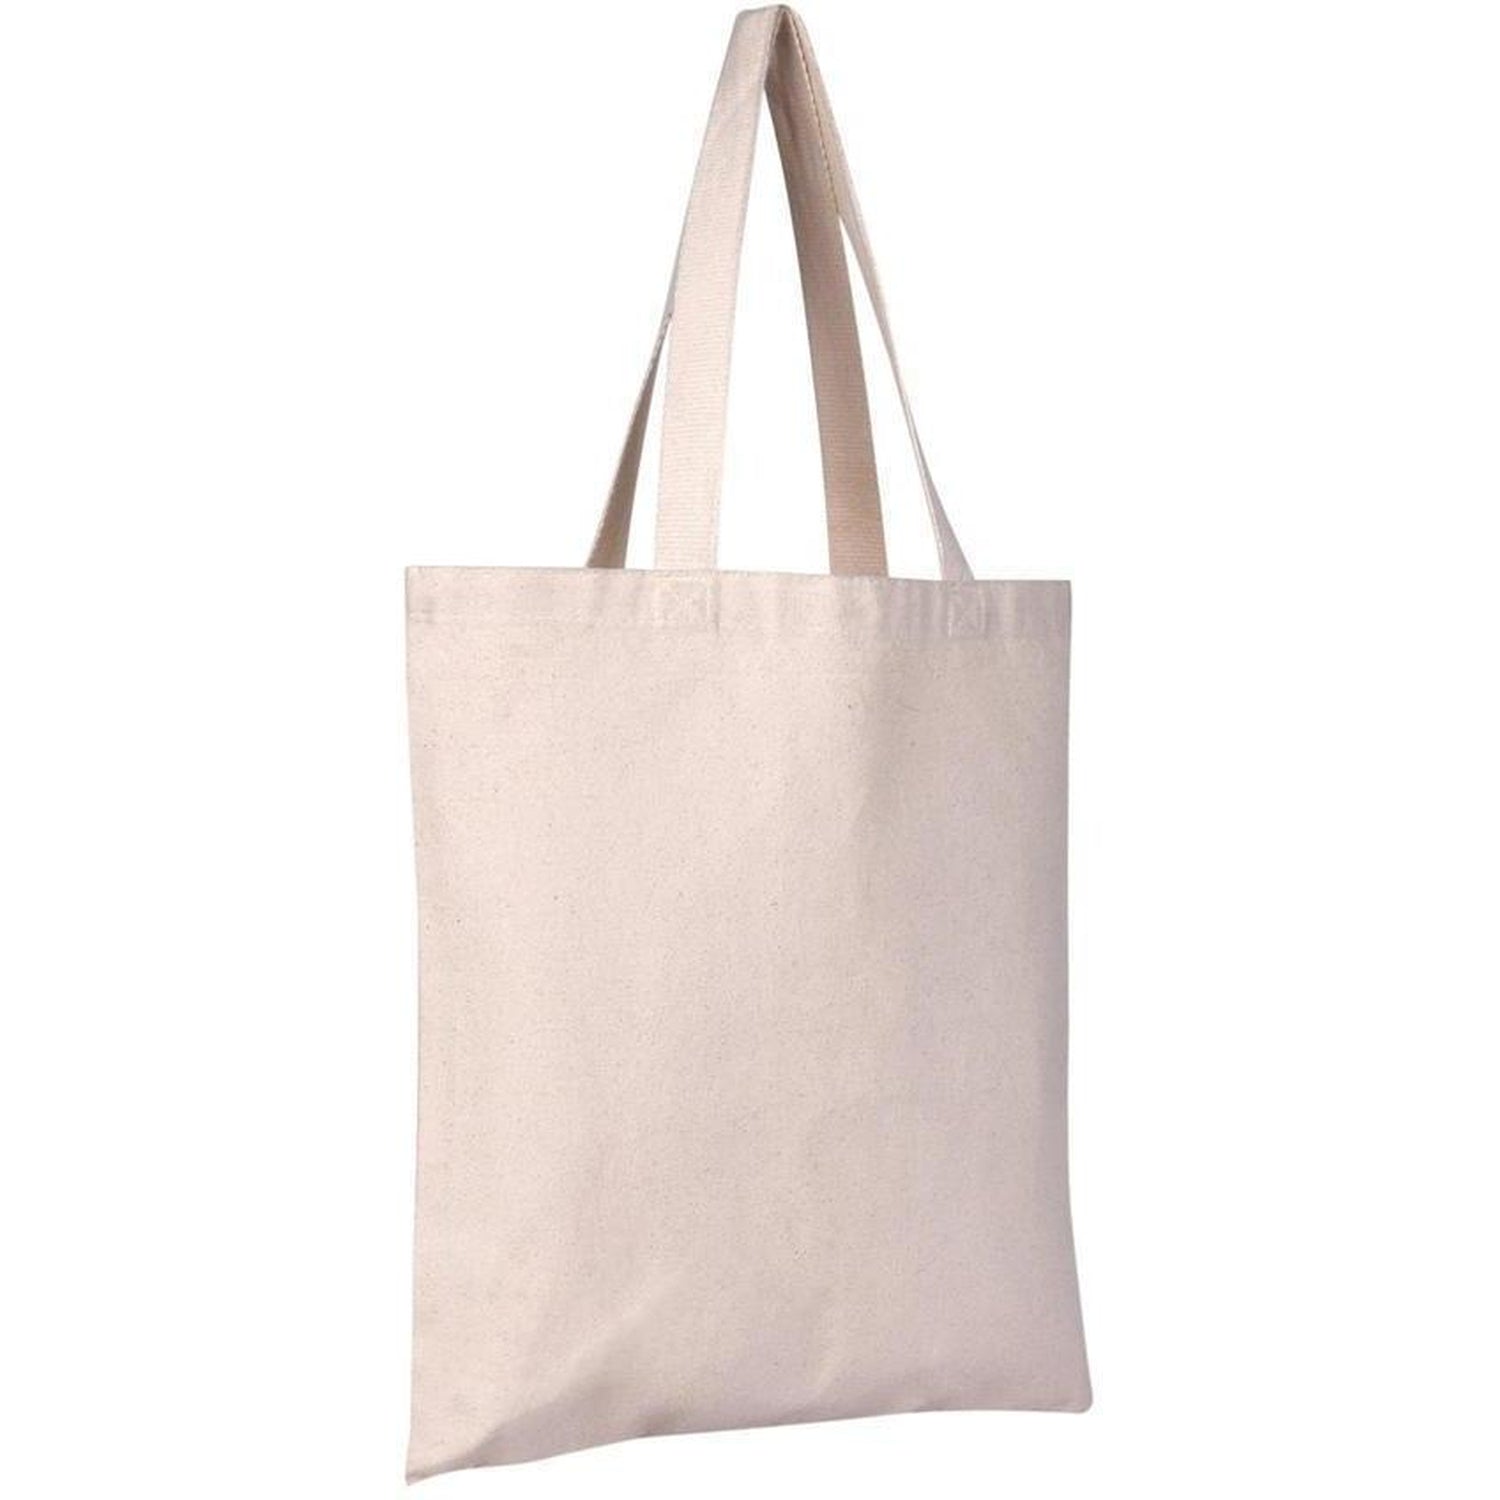 Canvas Tote Bags | Personalized Tote Bags & Tote Bags Wholesale – BagzDepot™